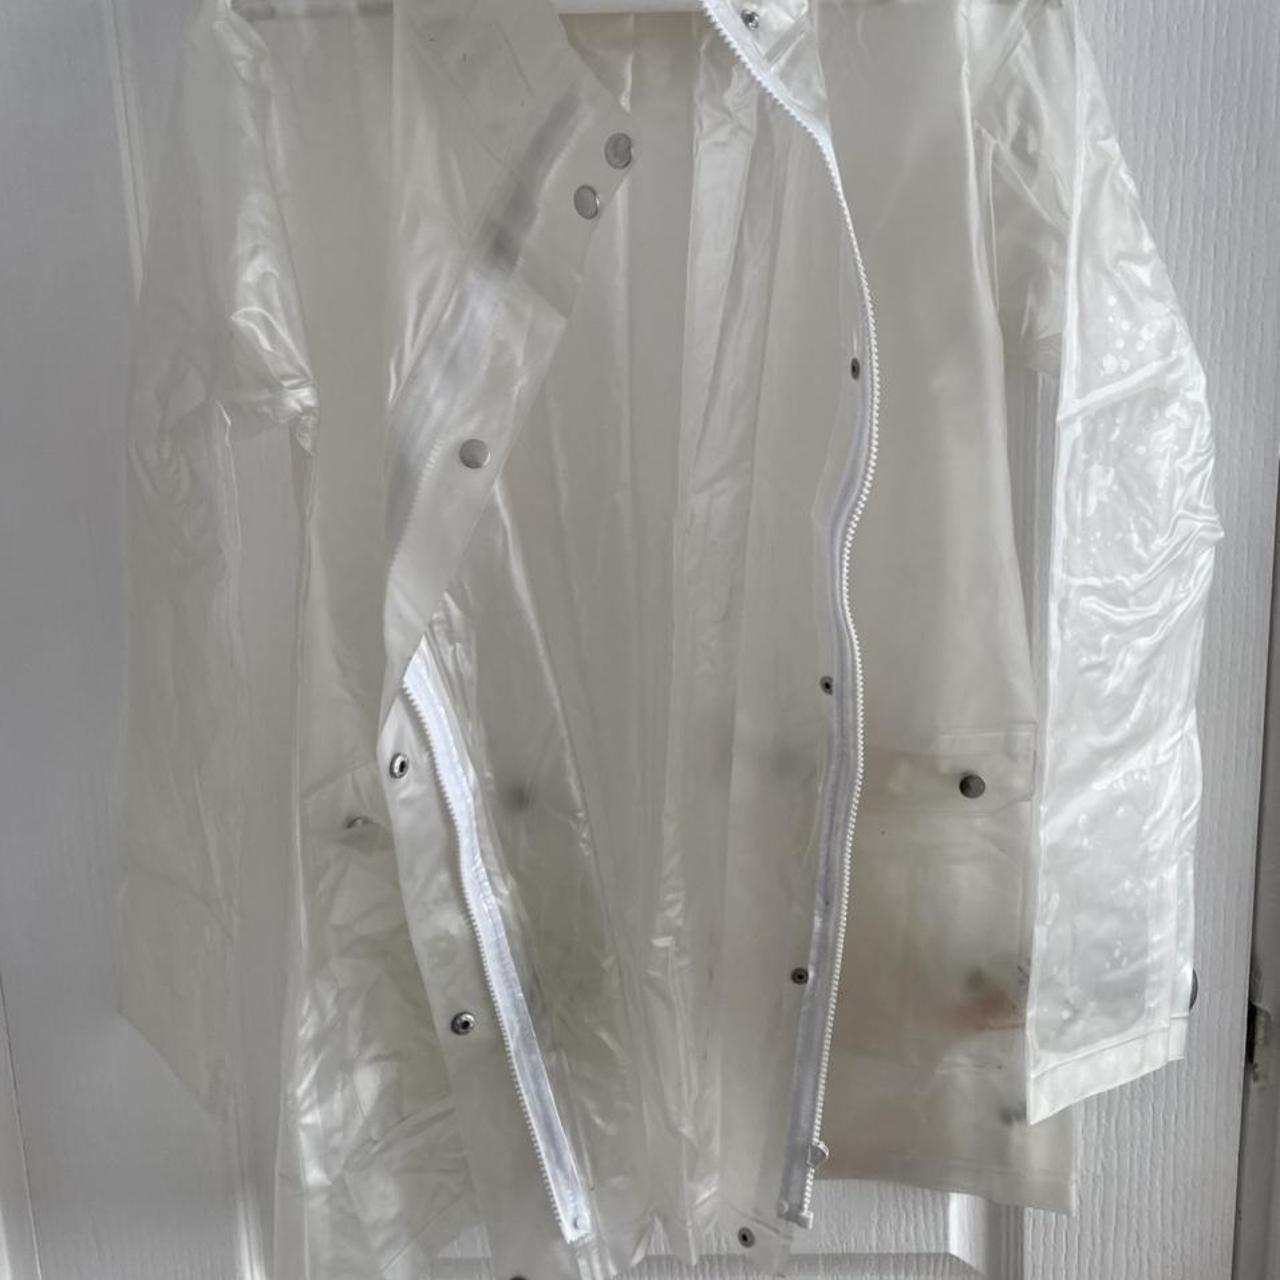 See through raincoat with a hood and pockets, it... - Depop